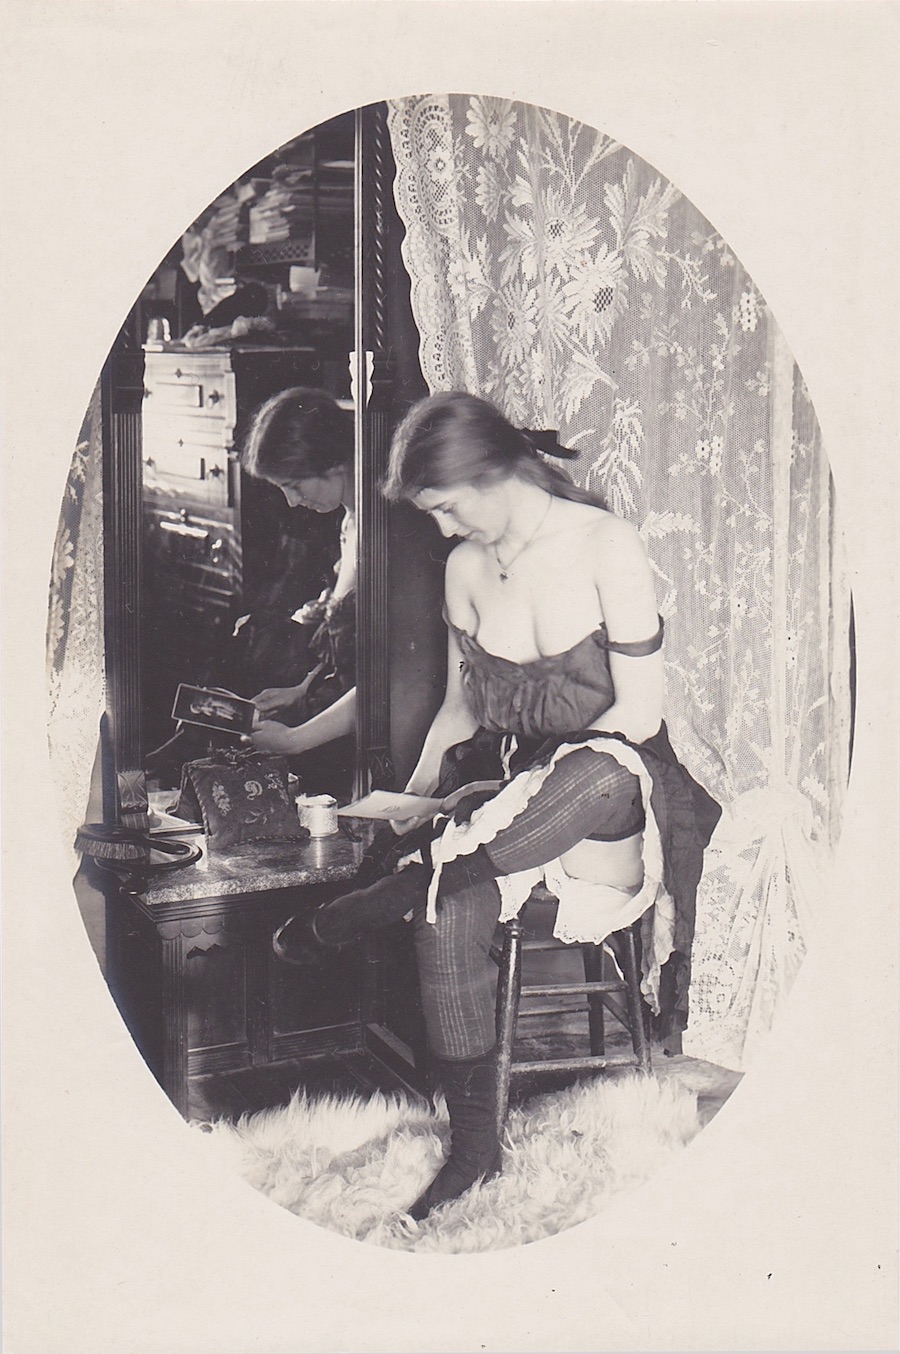 A working girl image from the exhibit